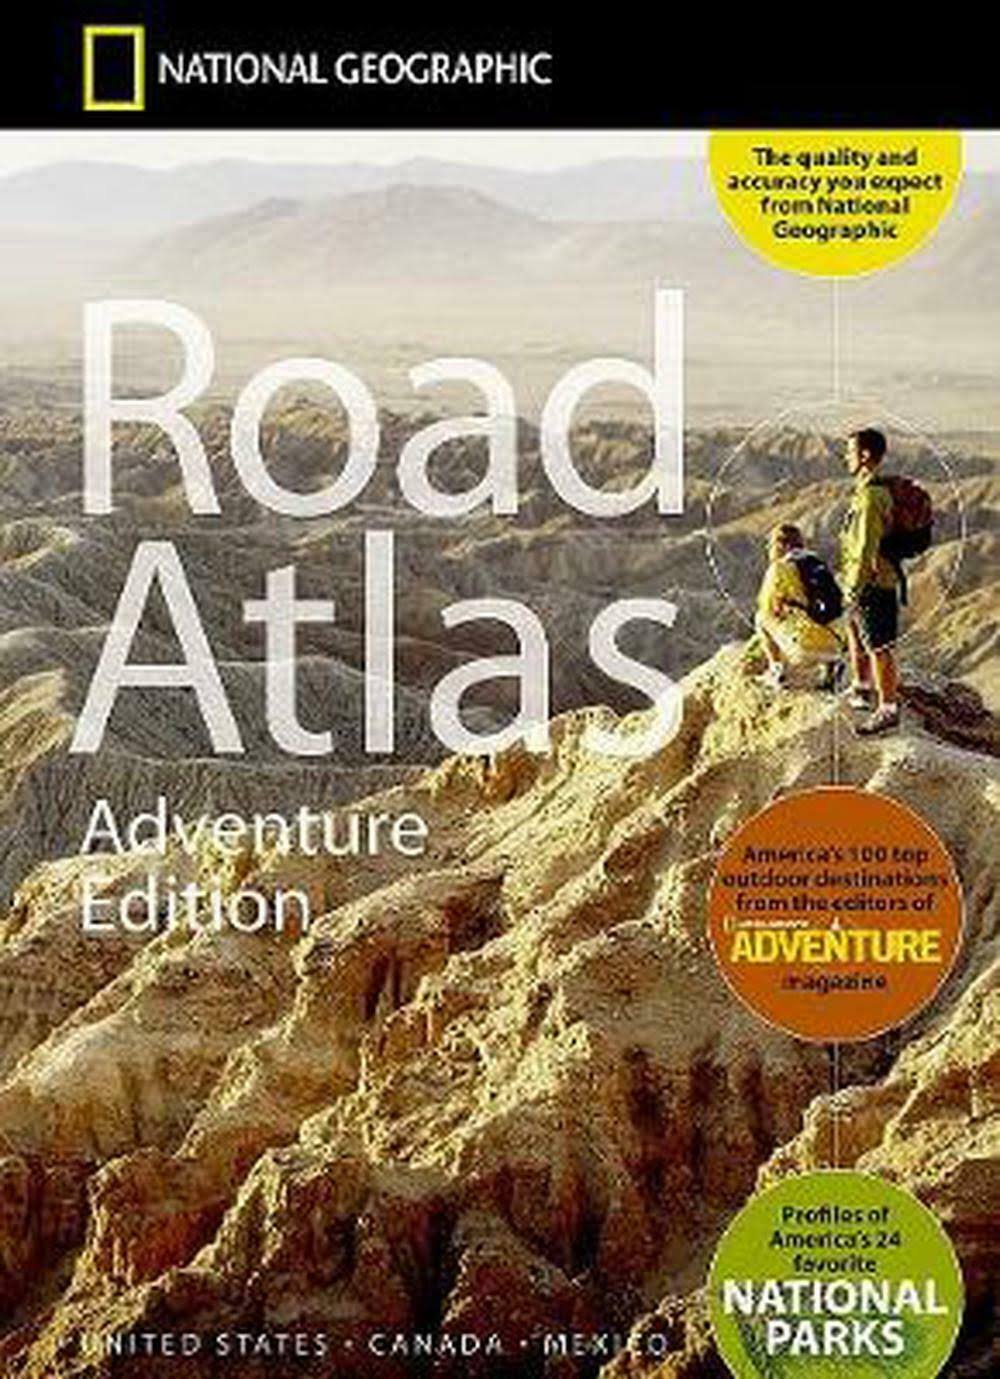 National Geographic Road Atlas - National Geographic Maps